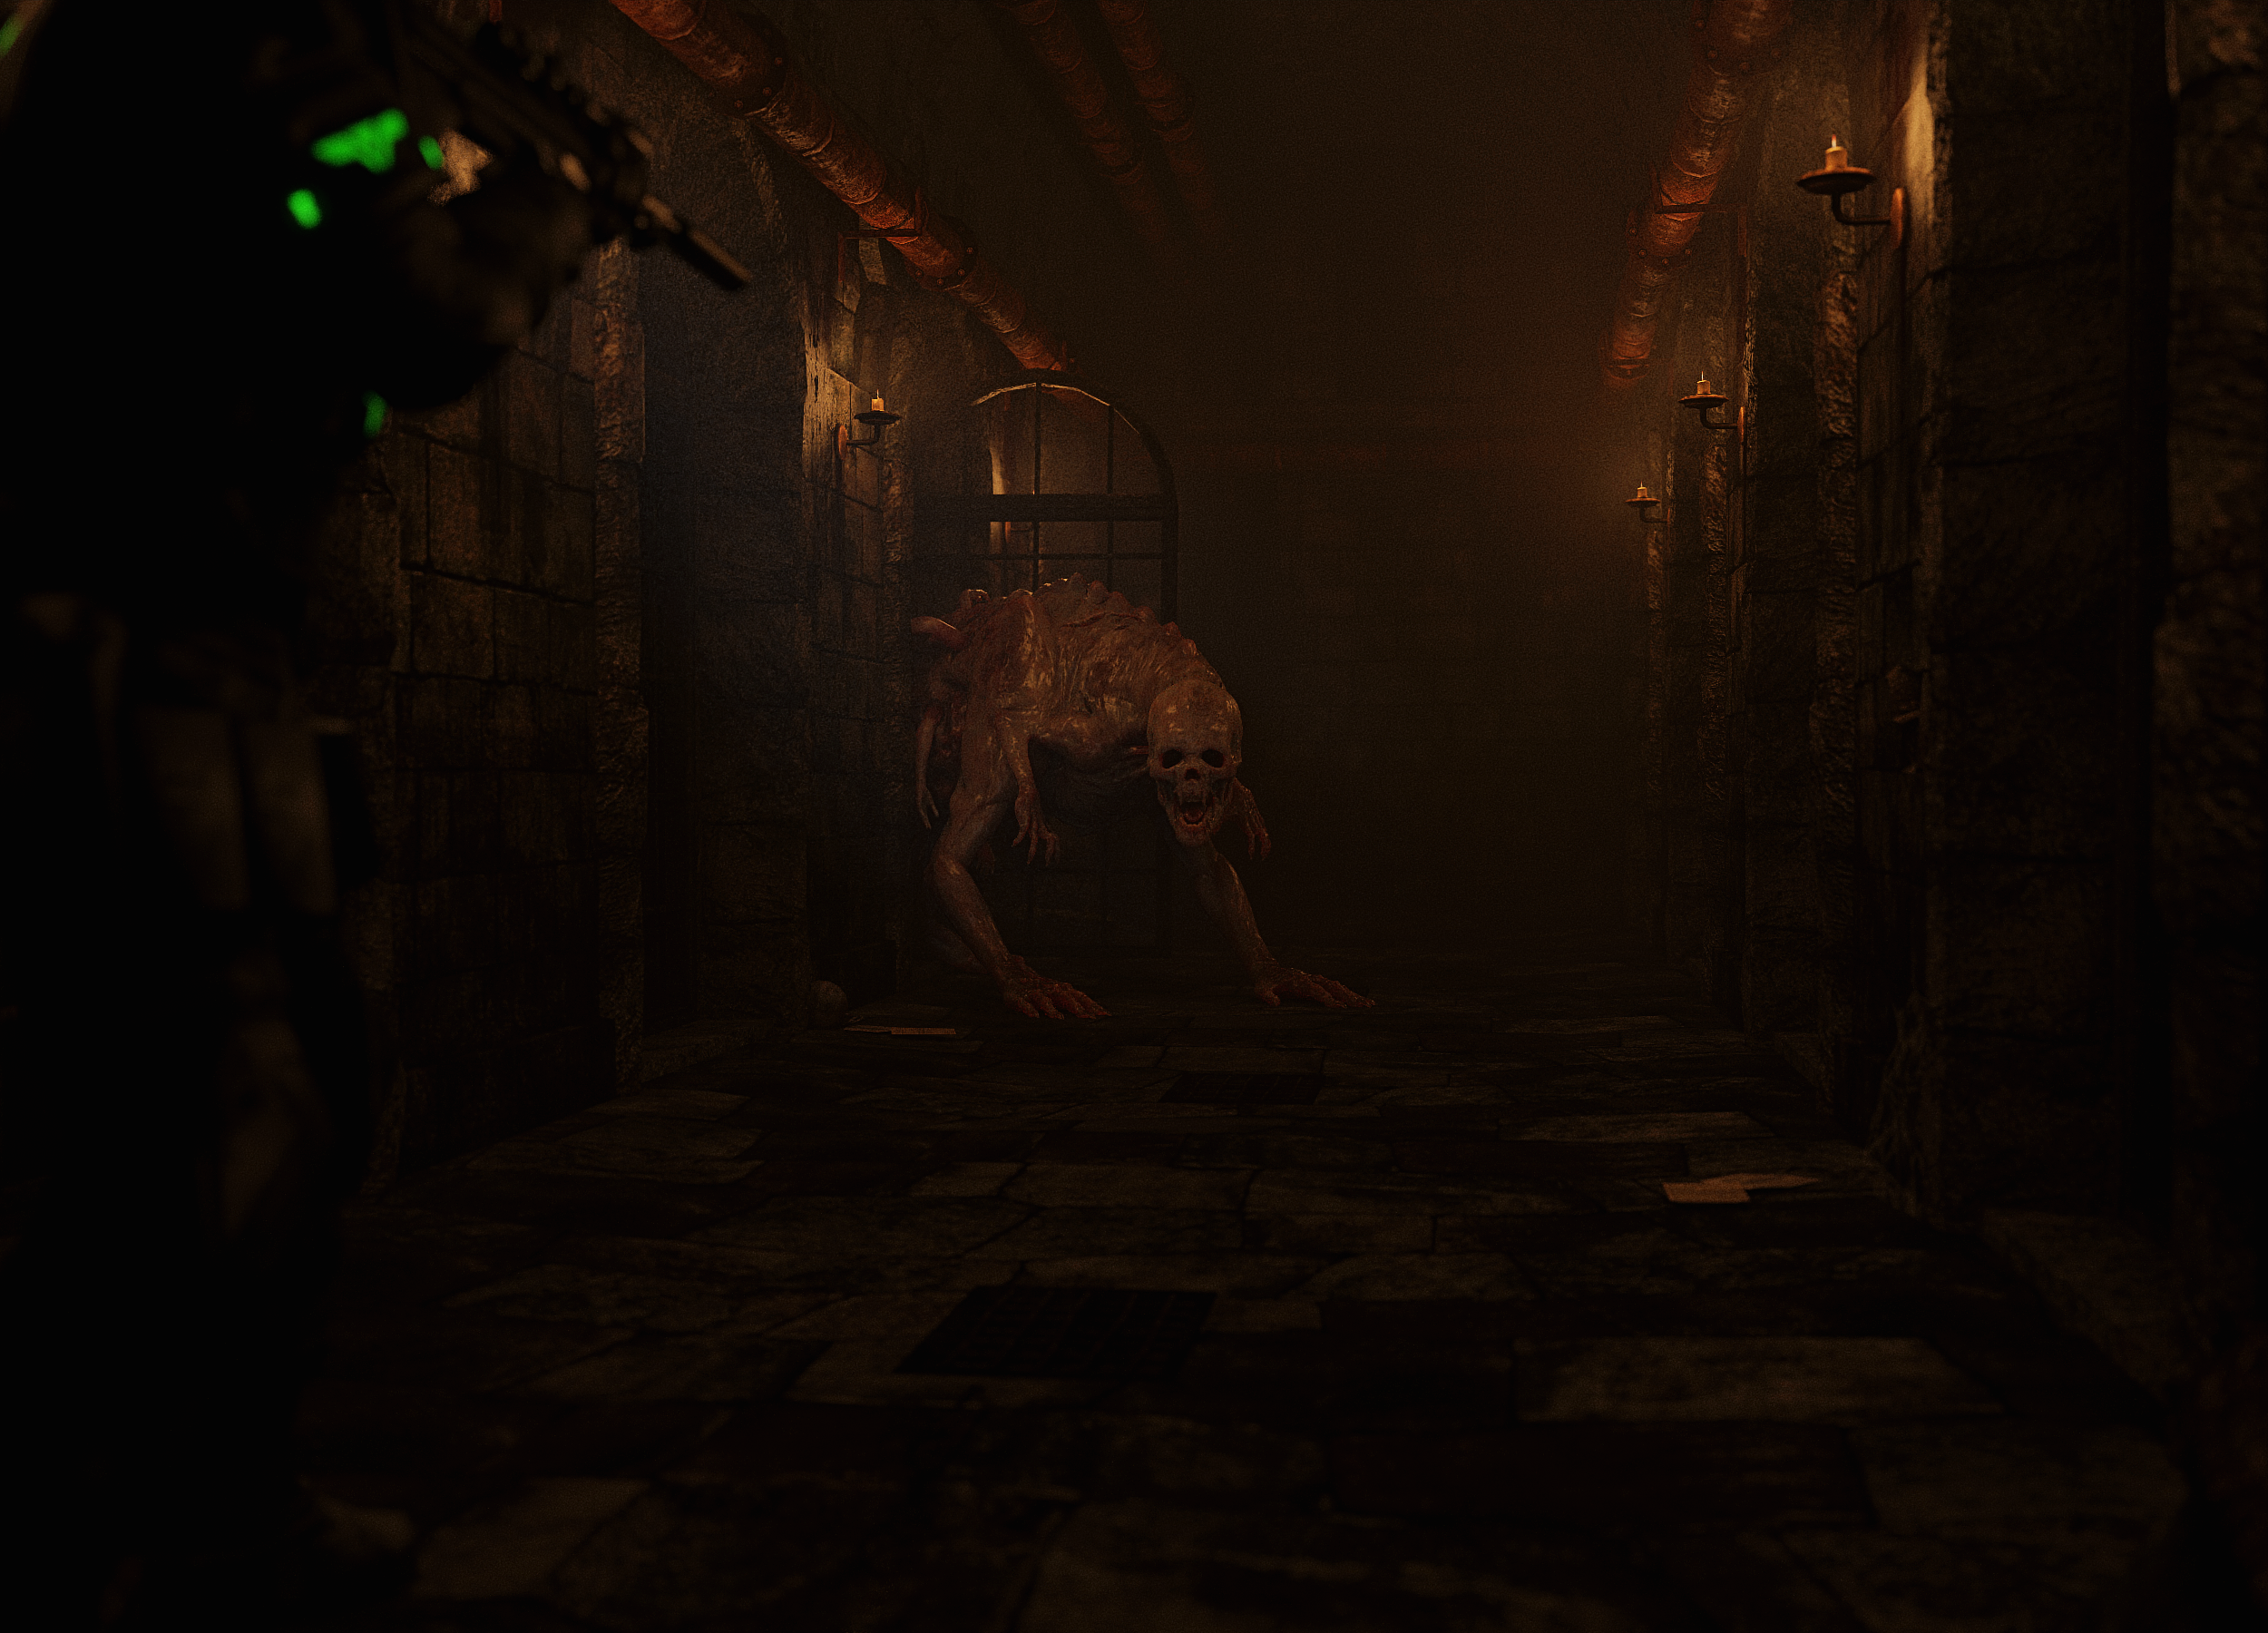 Nightmare Creepy Prison Dungeon The Hound The Medium F E A R 2 Project Origin Candles Gates Weapon 2500x1800